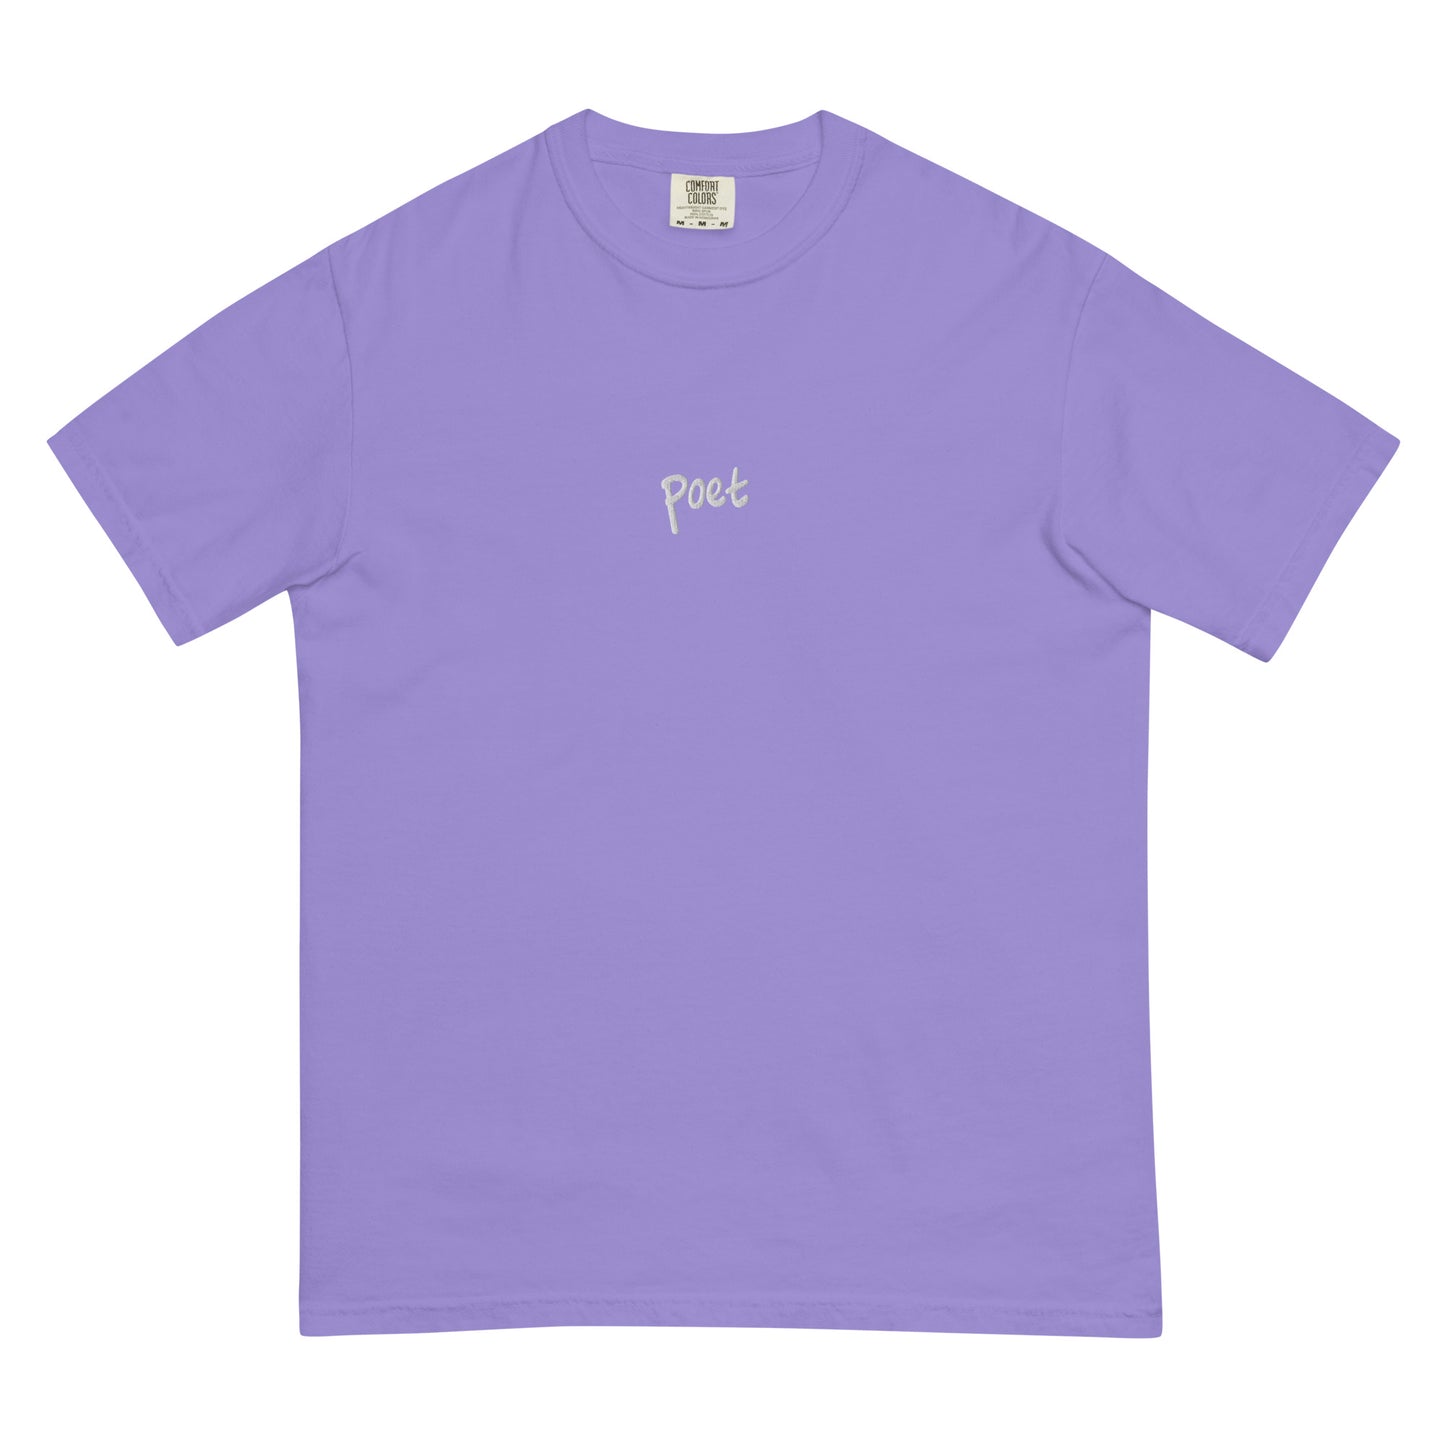 poet embroidered garment-dyed heavyweight t-shirt